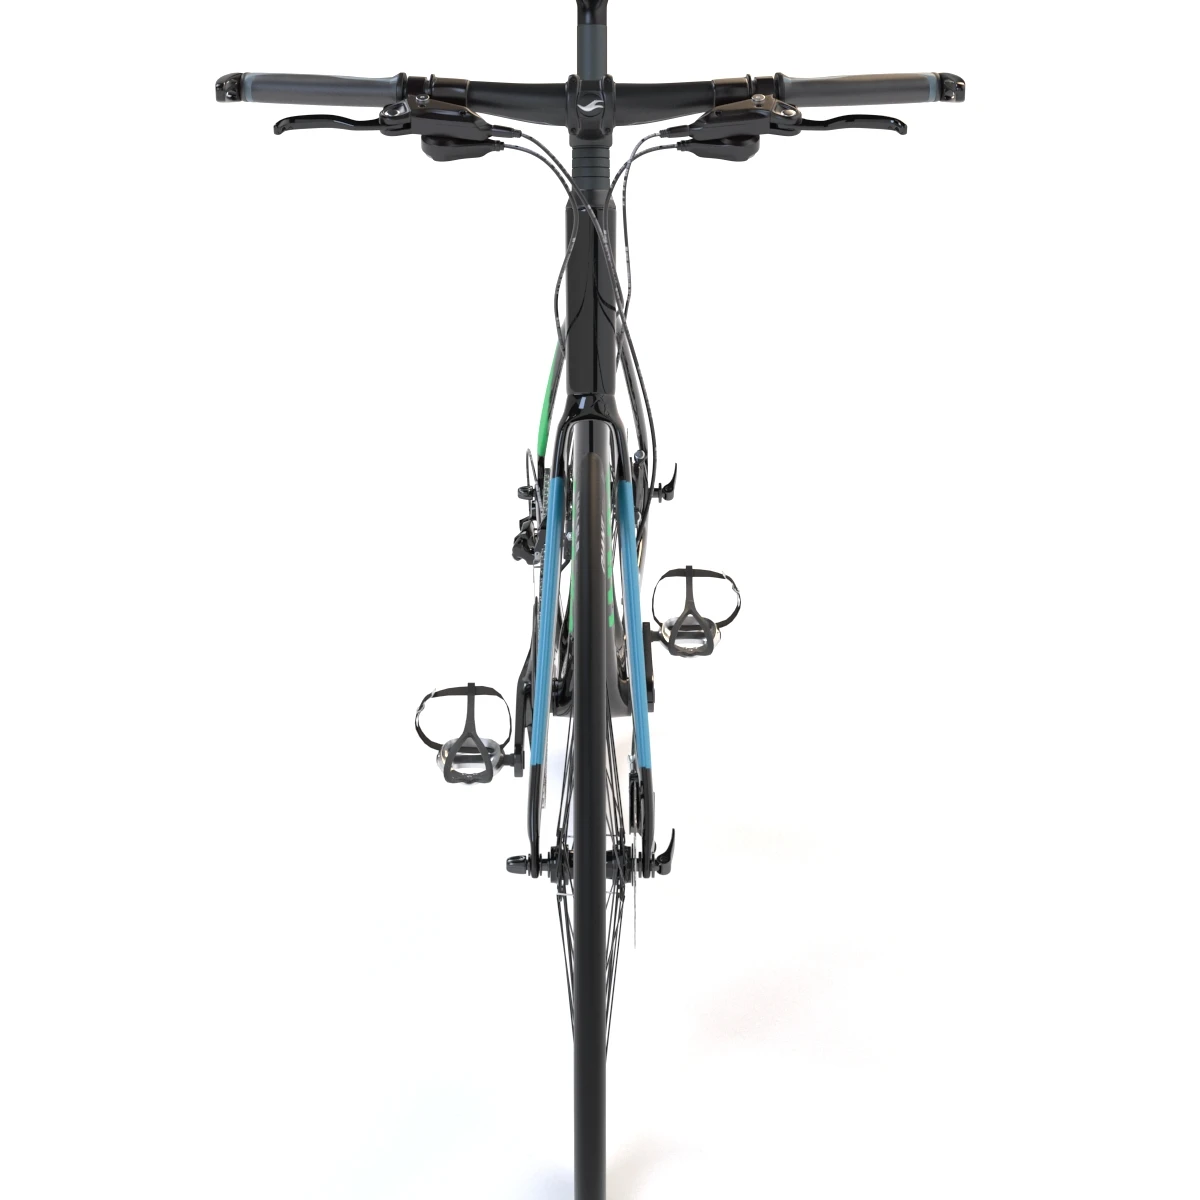 Giant Fastroad Cm1 Black Bicycle 3D Model_010